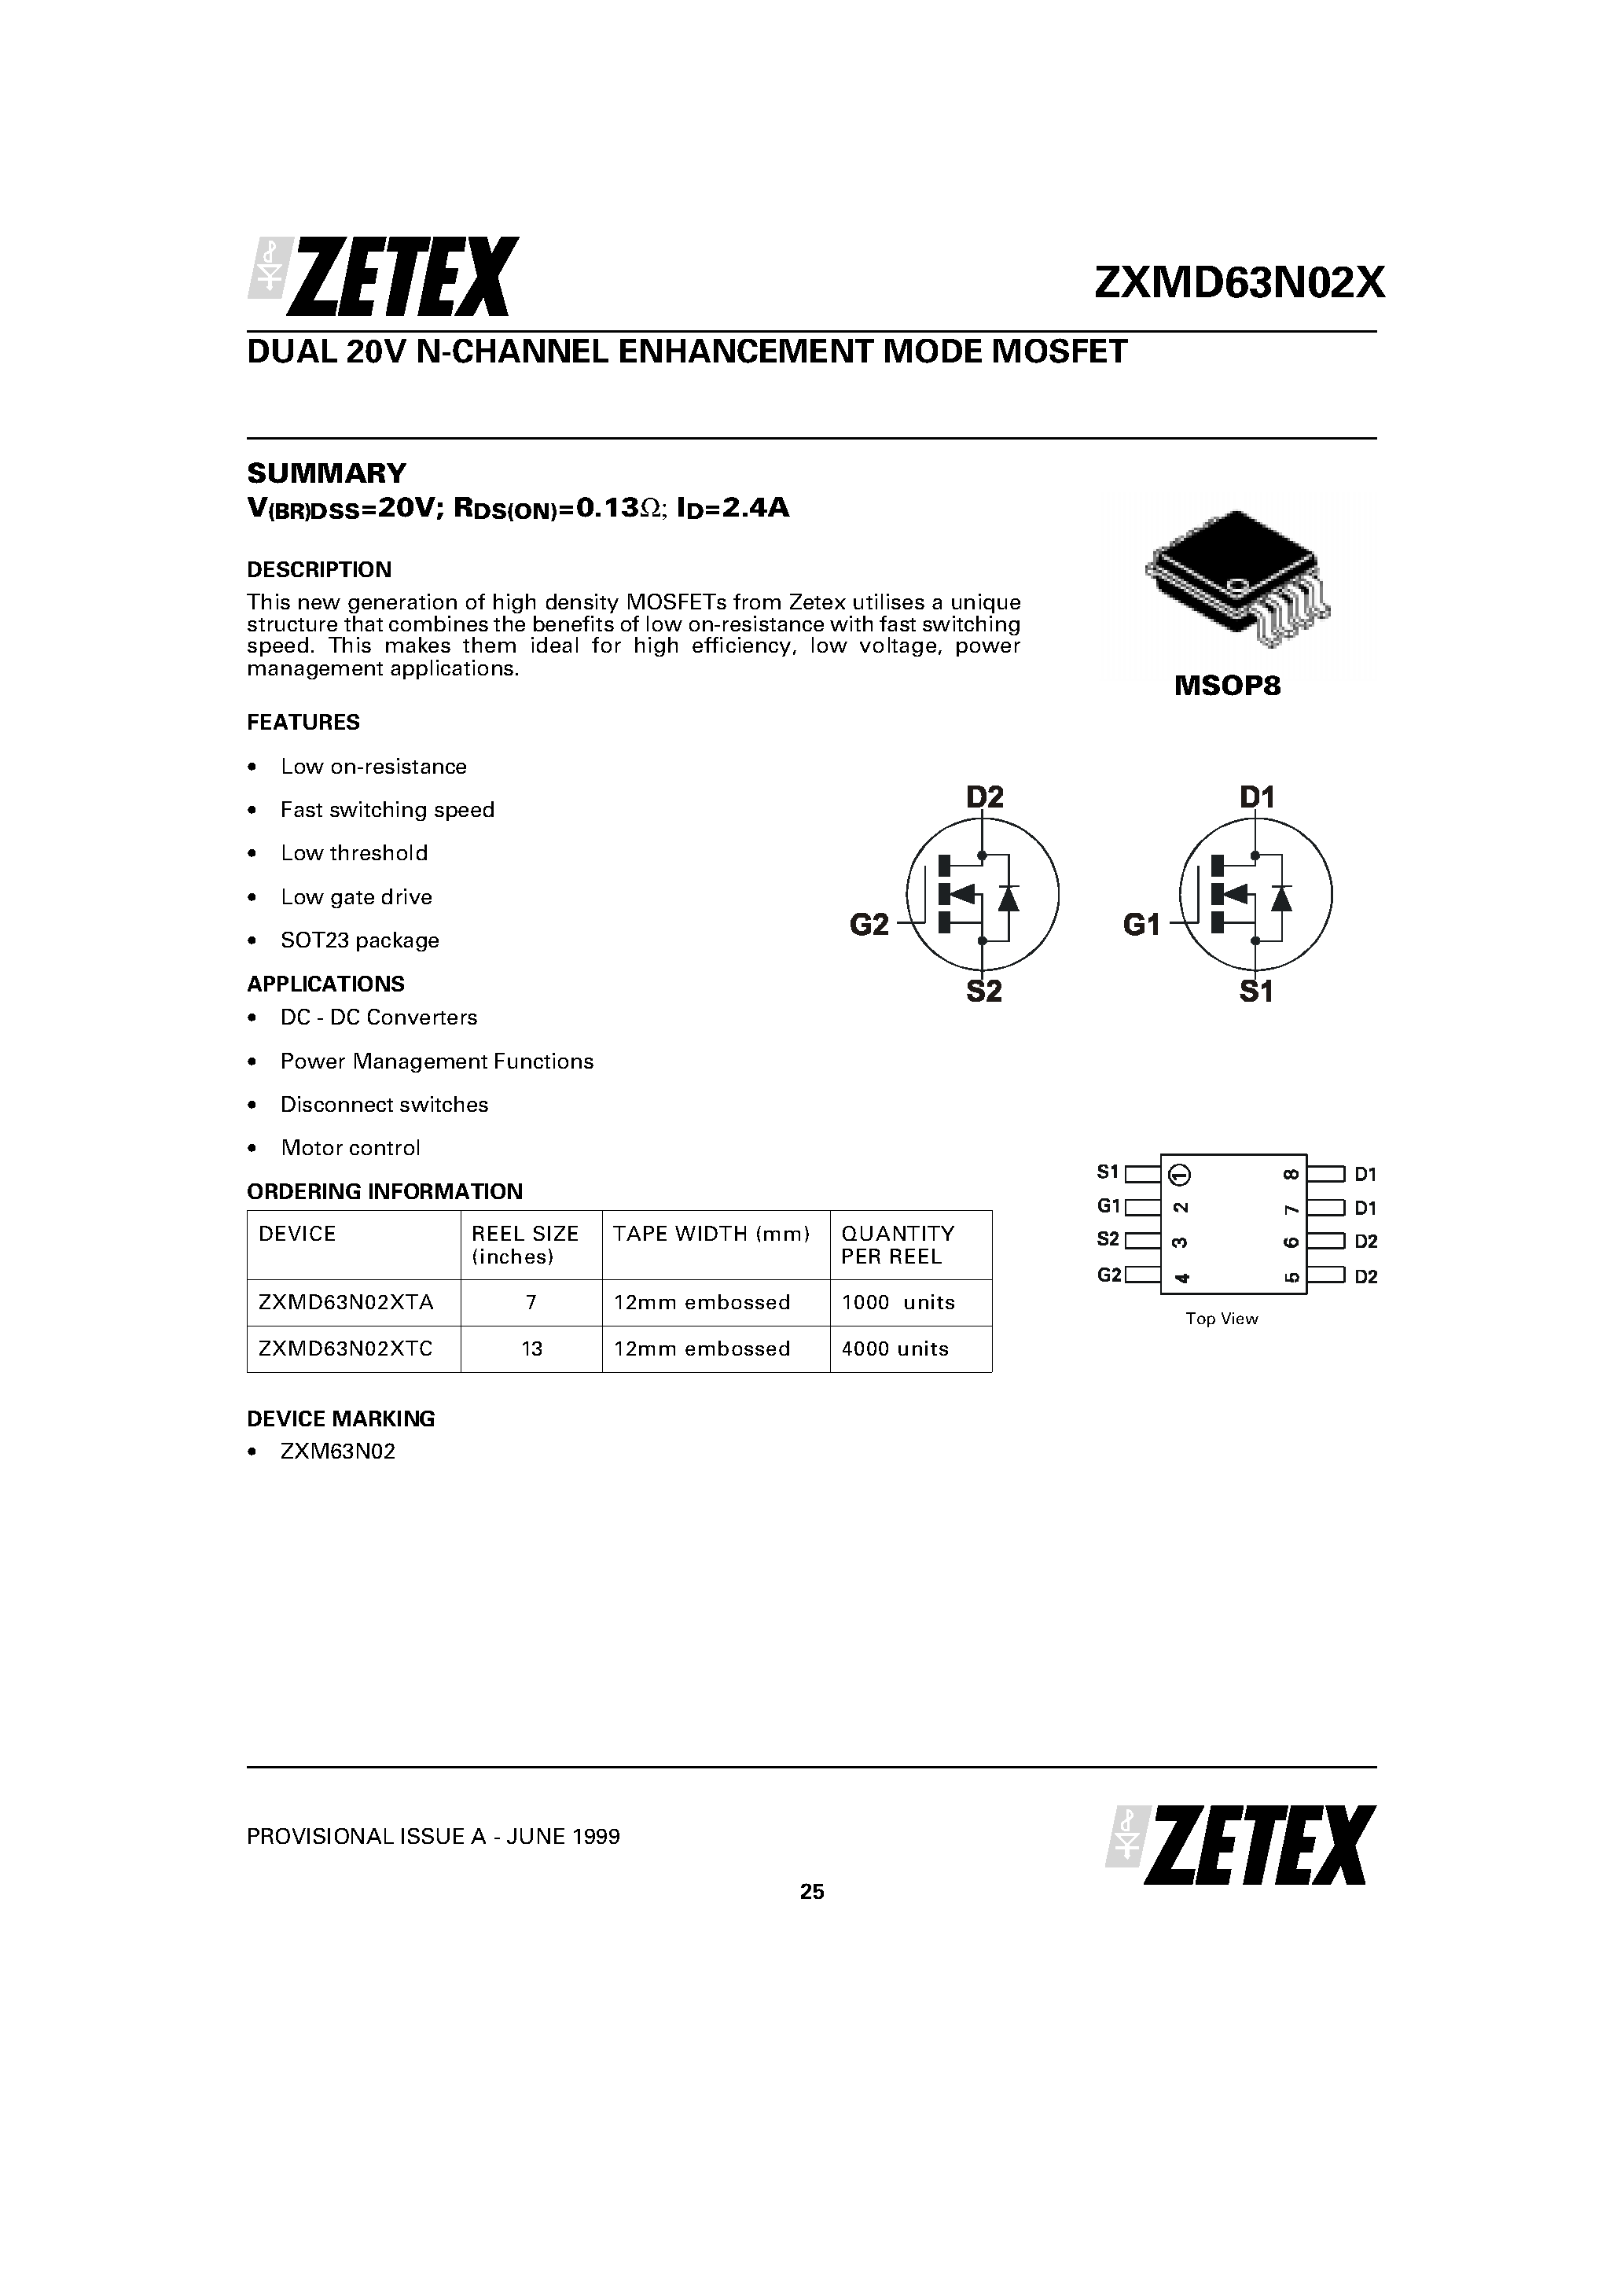 Даташит ZXMD63N02 - DUAL 20V N-CHANNEL ENHANCEMENT MODE MOSFET страница 1